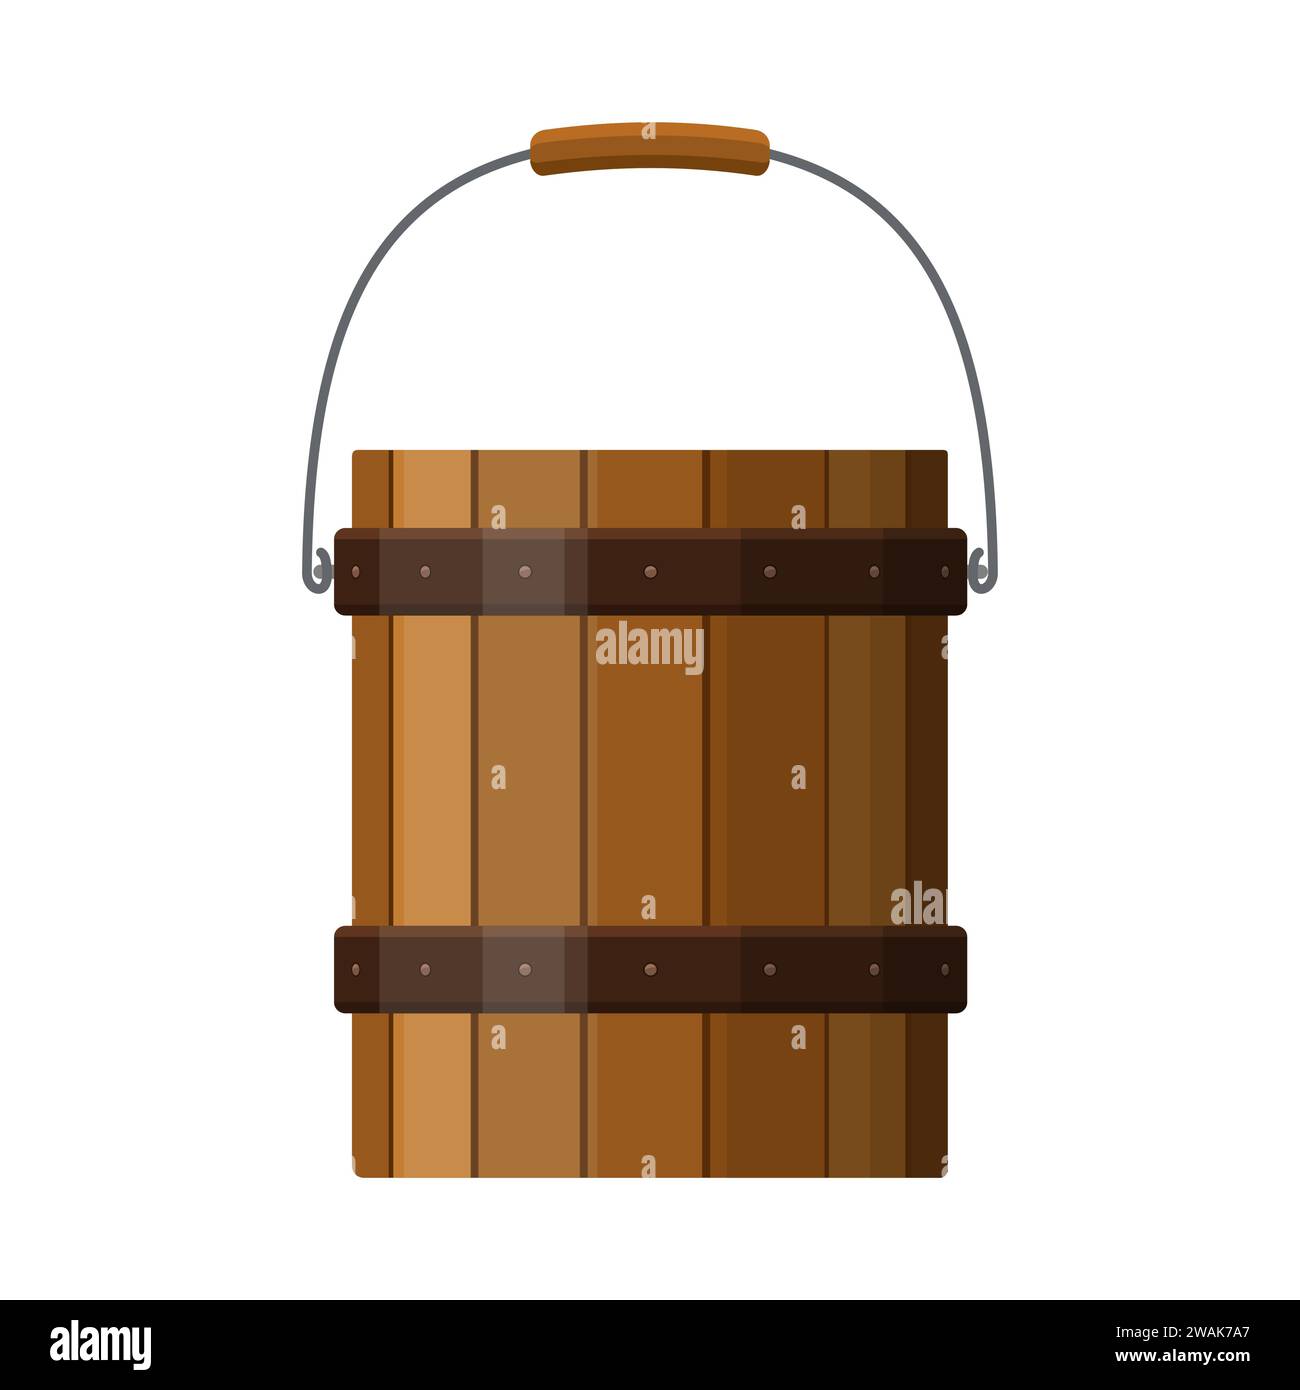 Wooden bucket with handle and metal strapping isolated on white background. Rustic wood pail icon. Vector illustration. Stock Vector